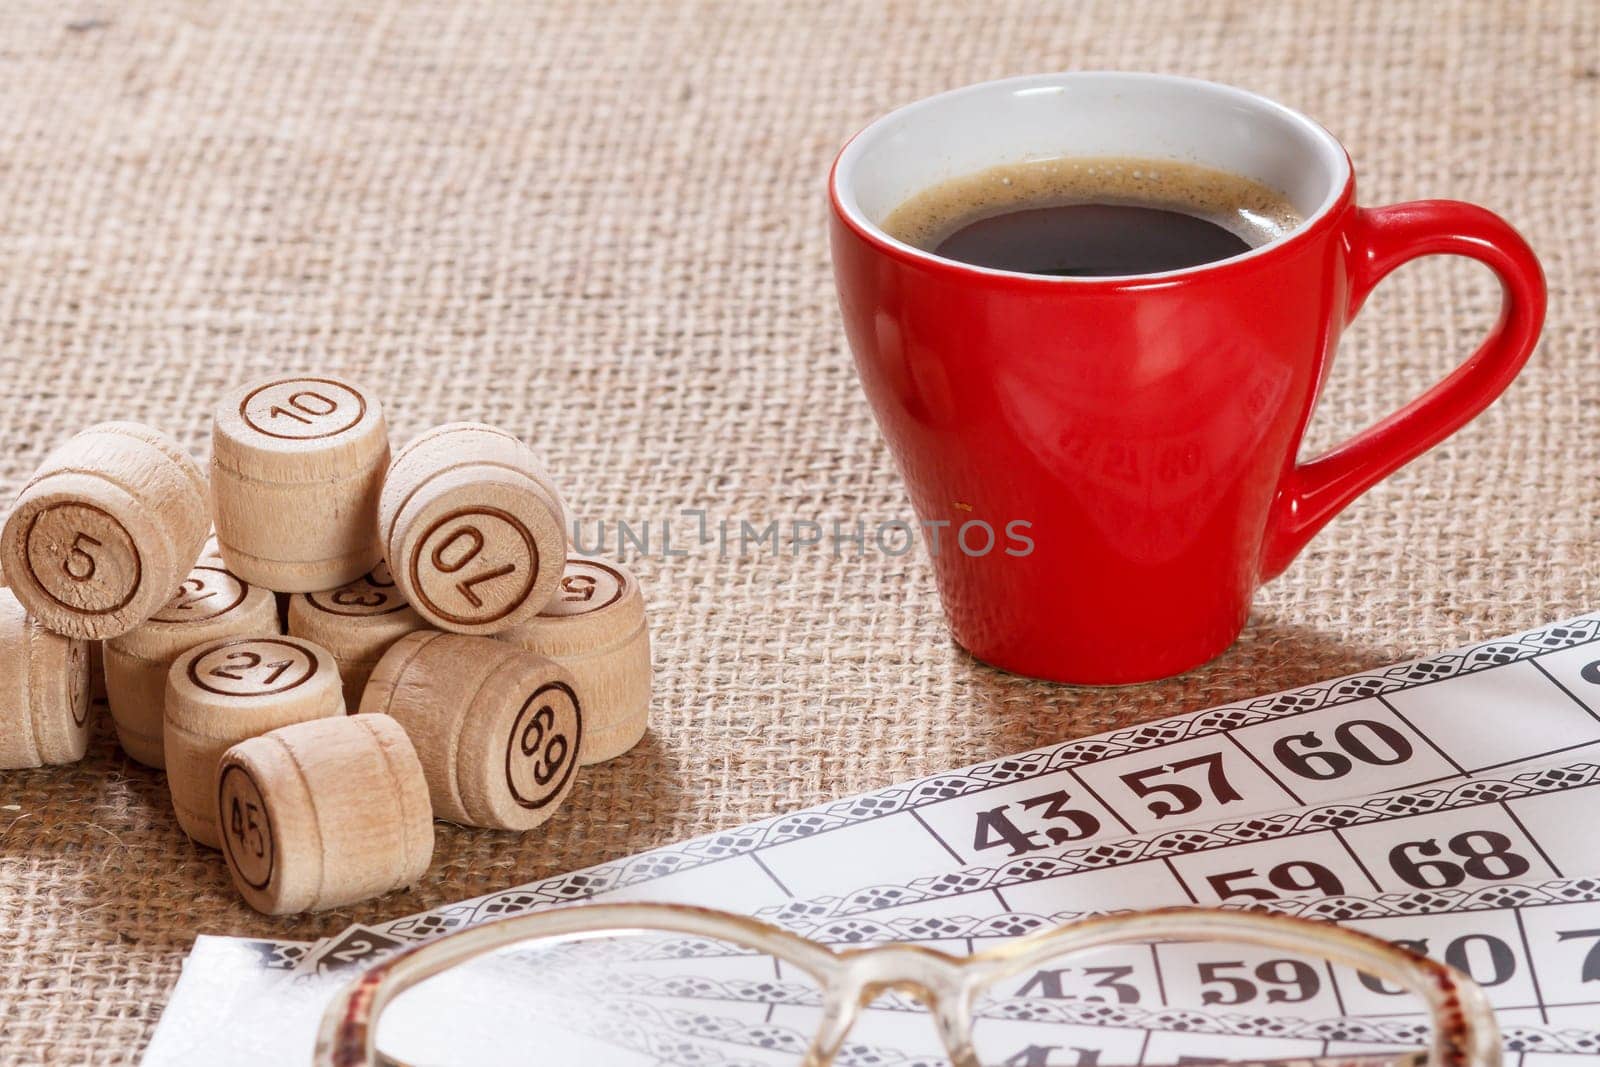 Board game lotto on sackcloth. Wooden lotto barrels and game cards for a game in lotto with red cup of coffee and glasses.